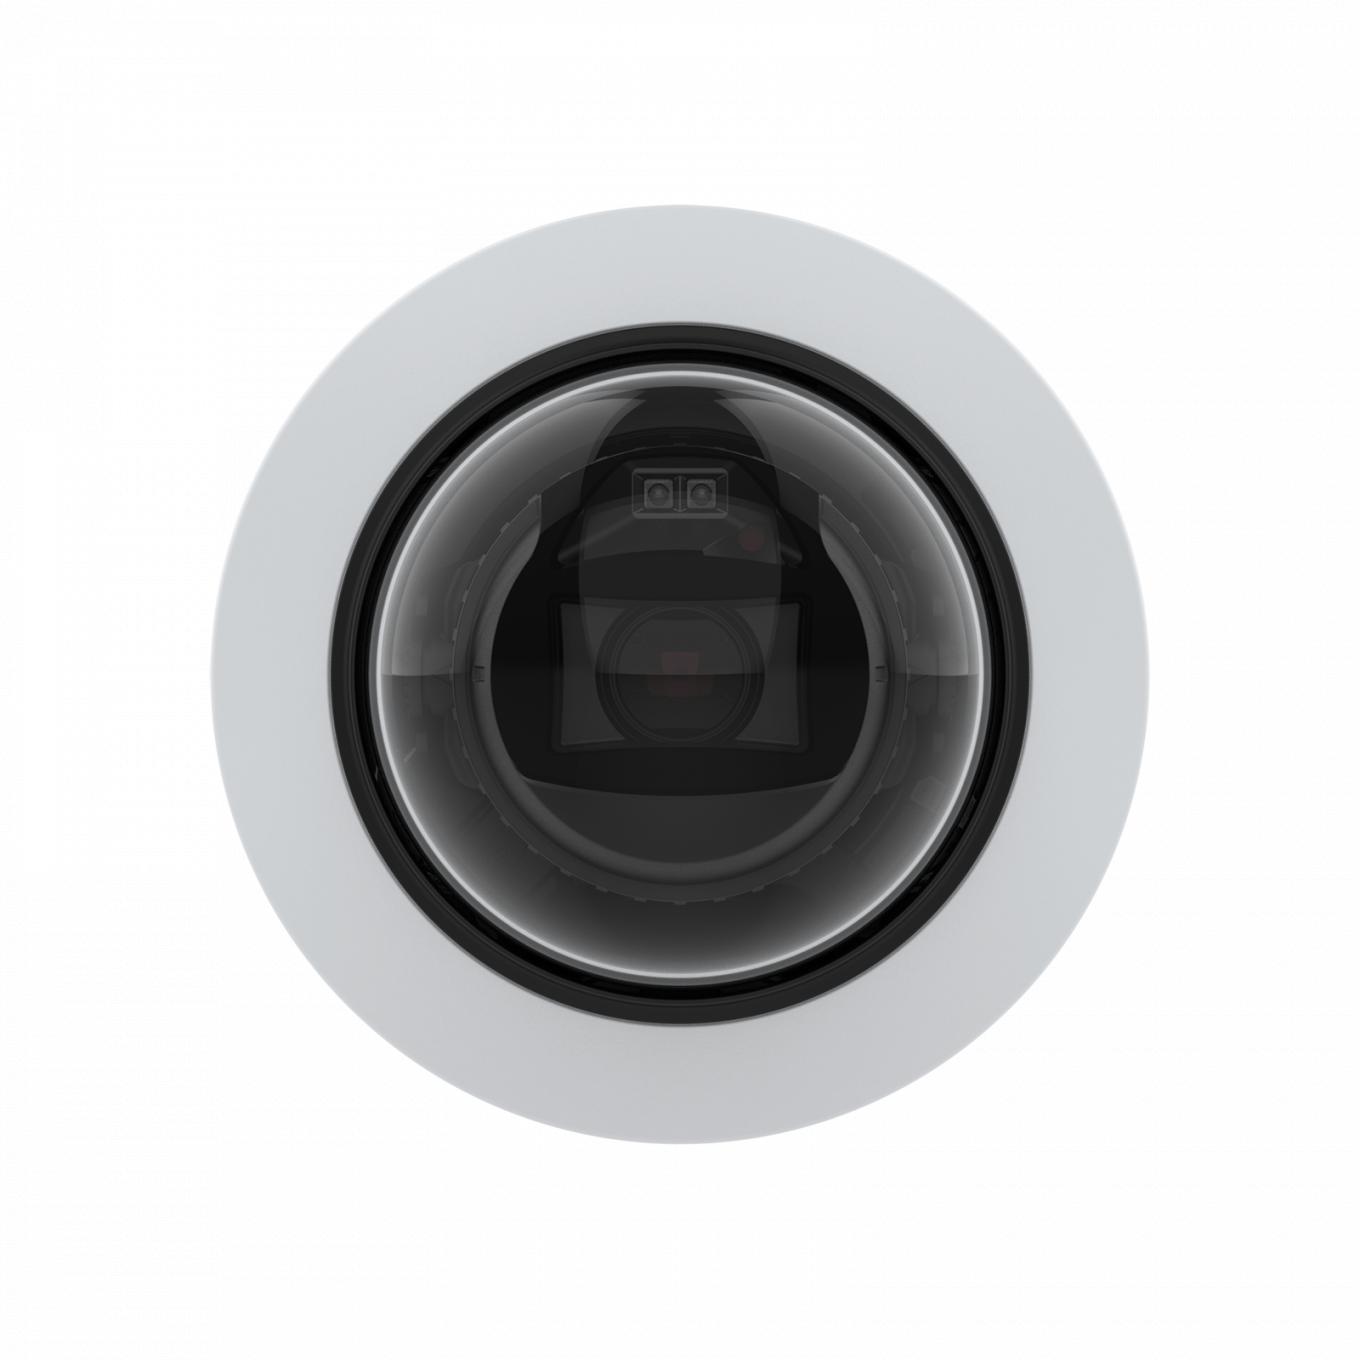 AXIS P3265-LV Dome Camera mounted on wall from front